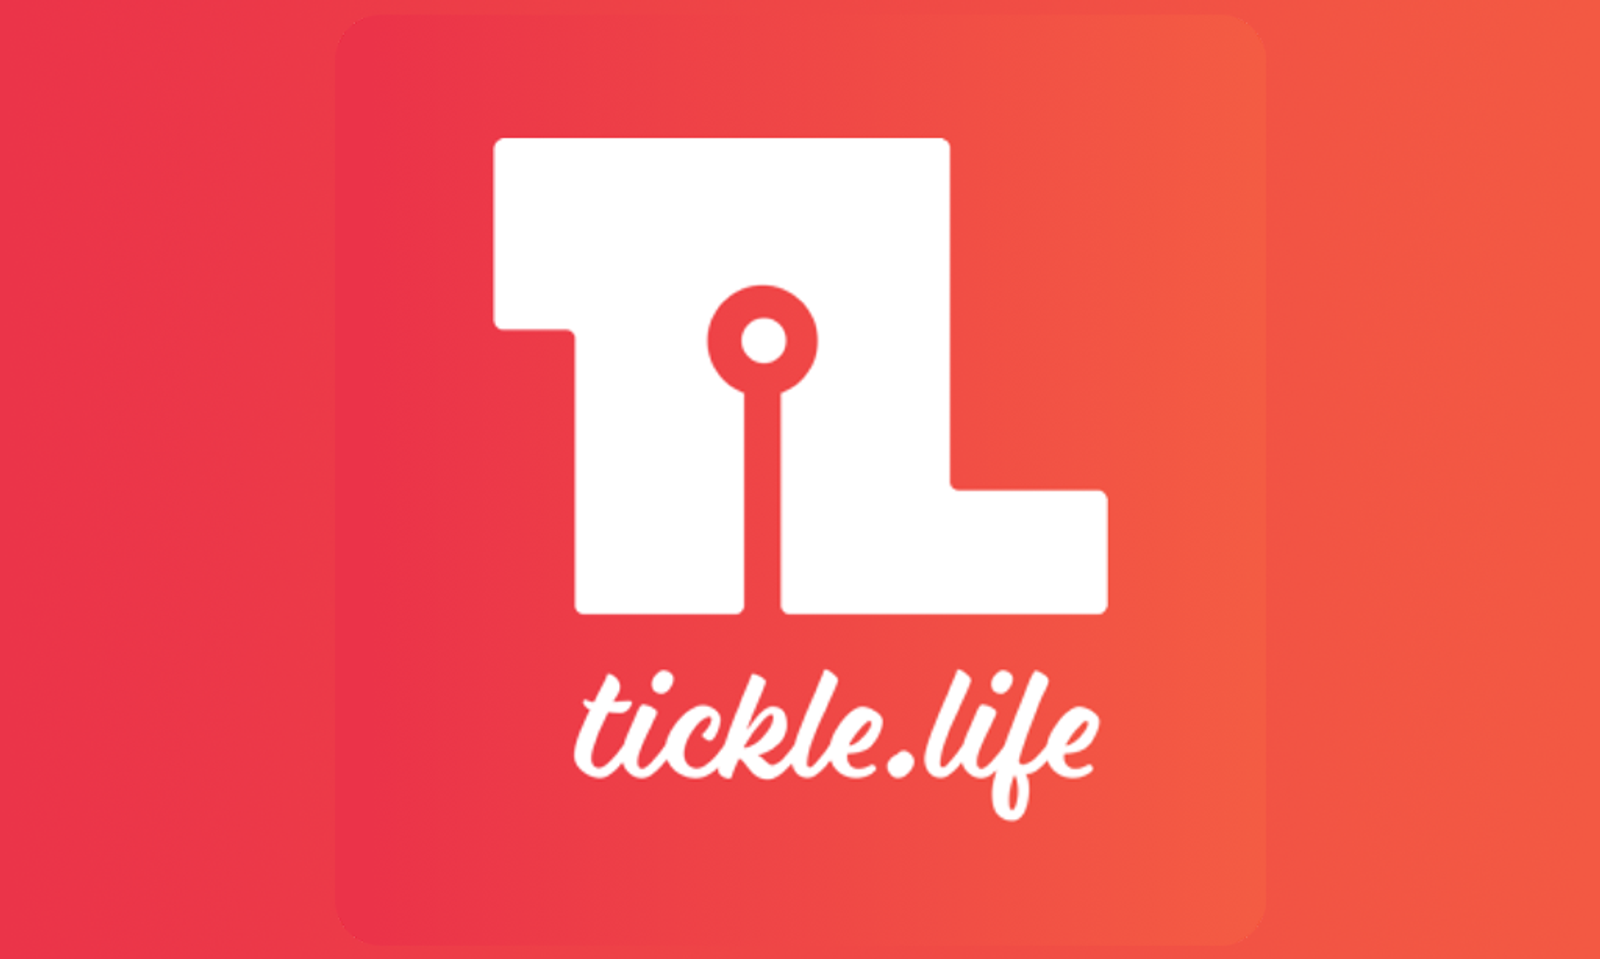 Tickle.Life Partners With App Do You for Sexual Discovery & Fun